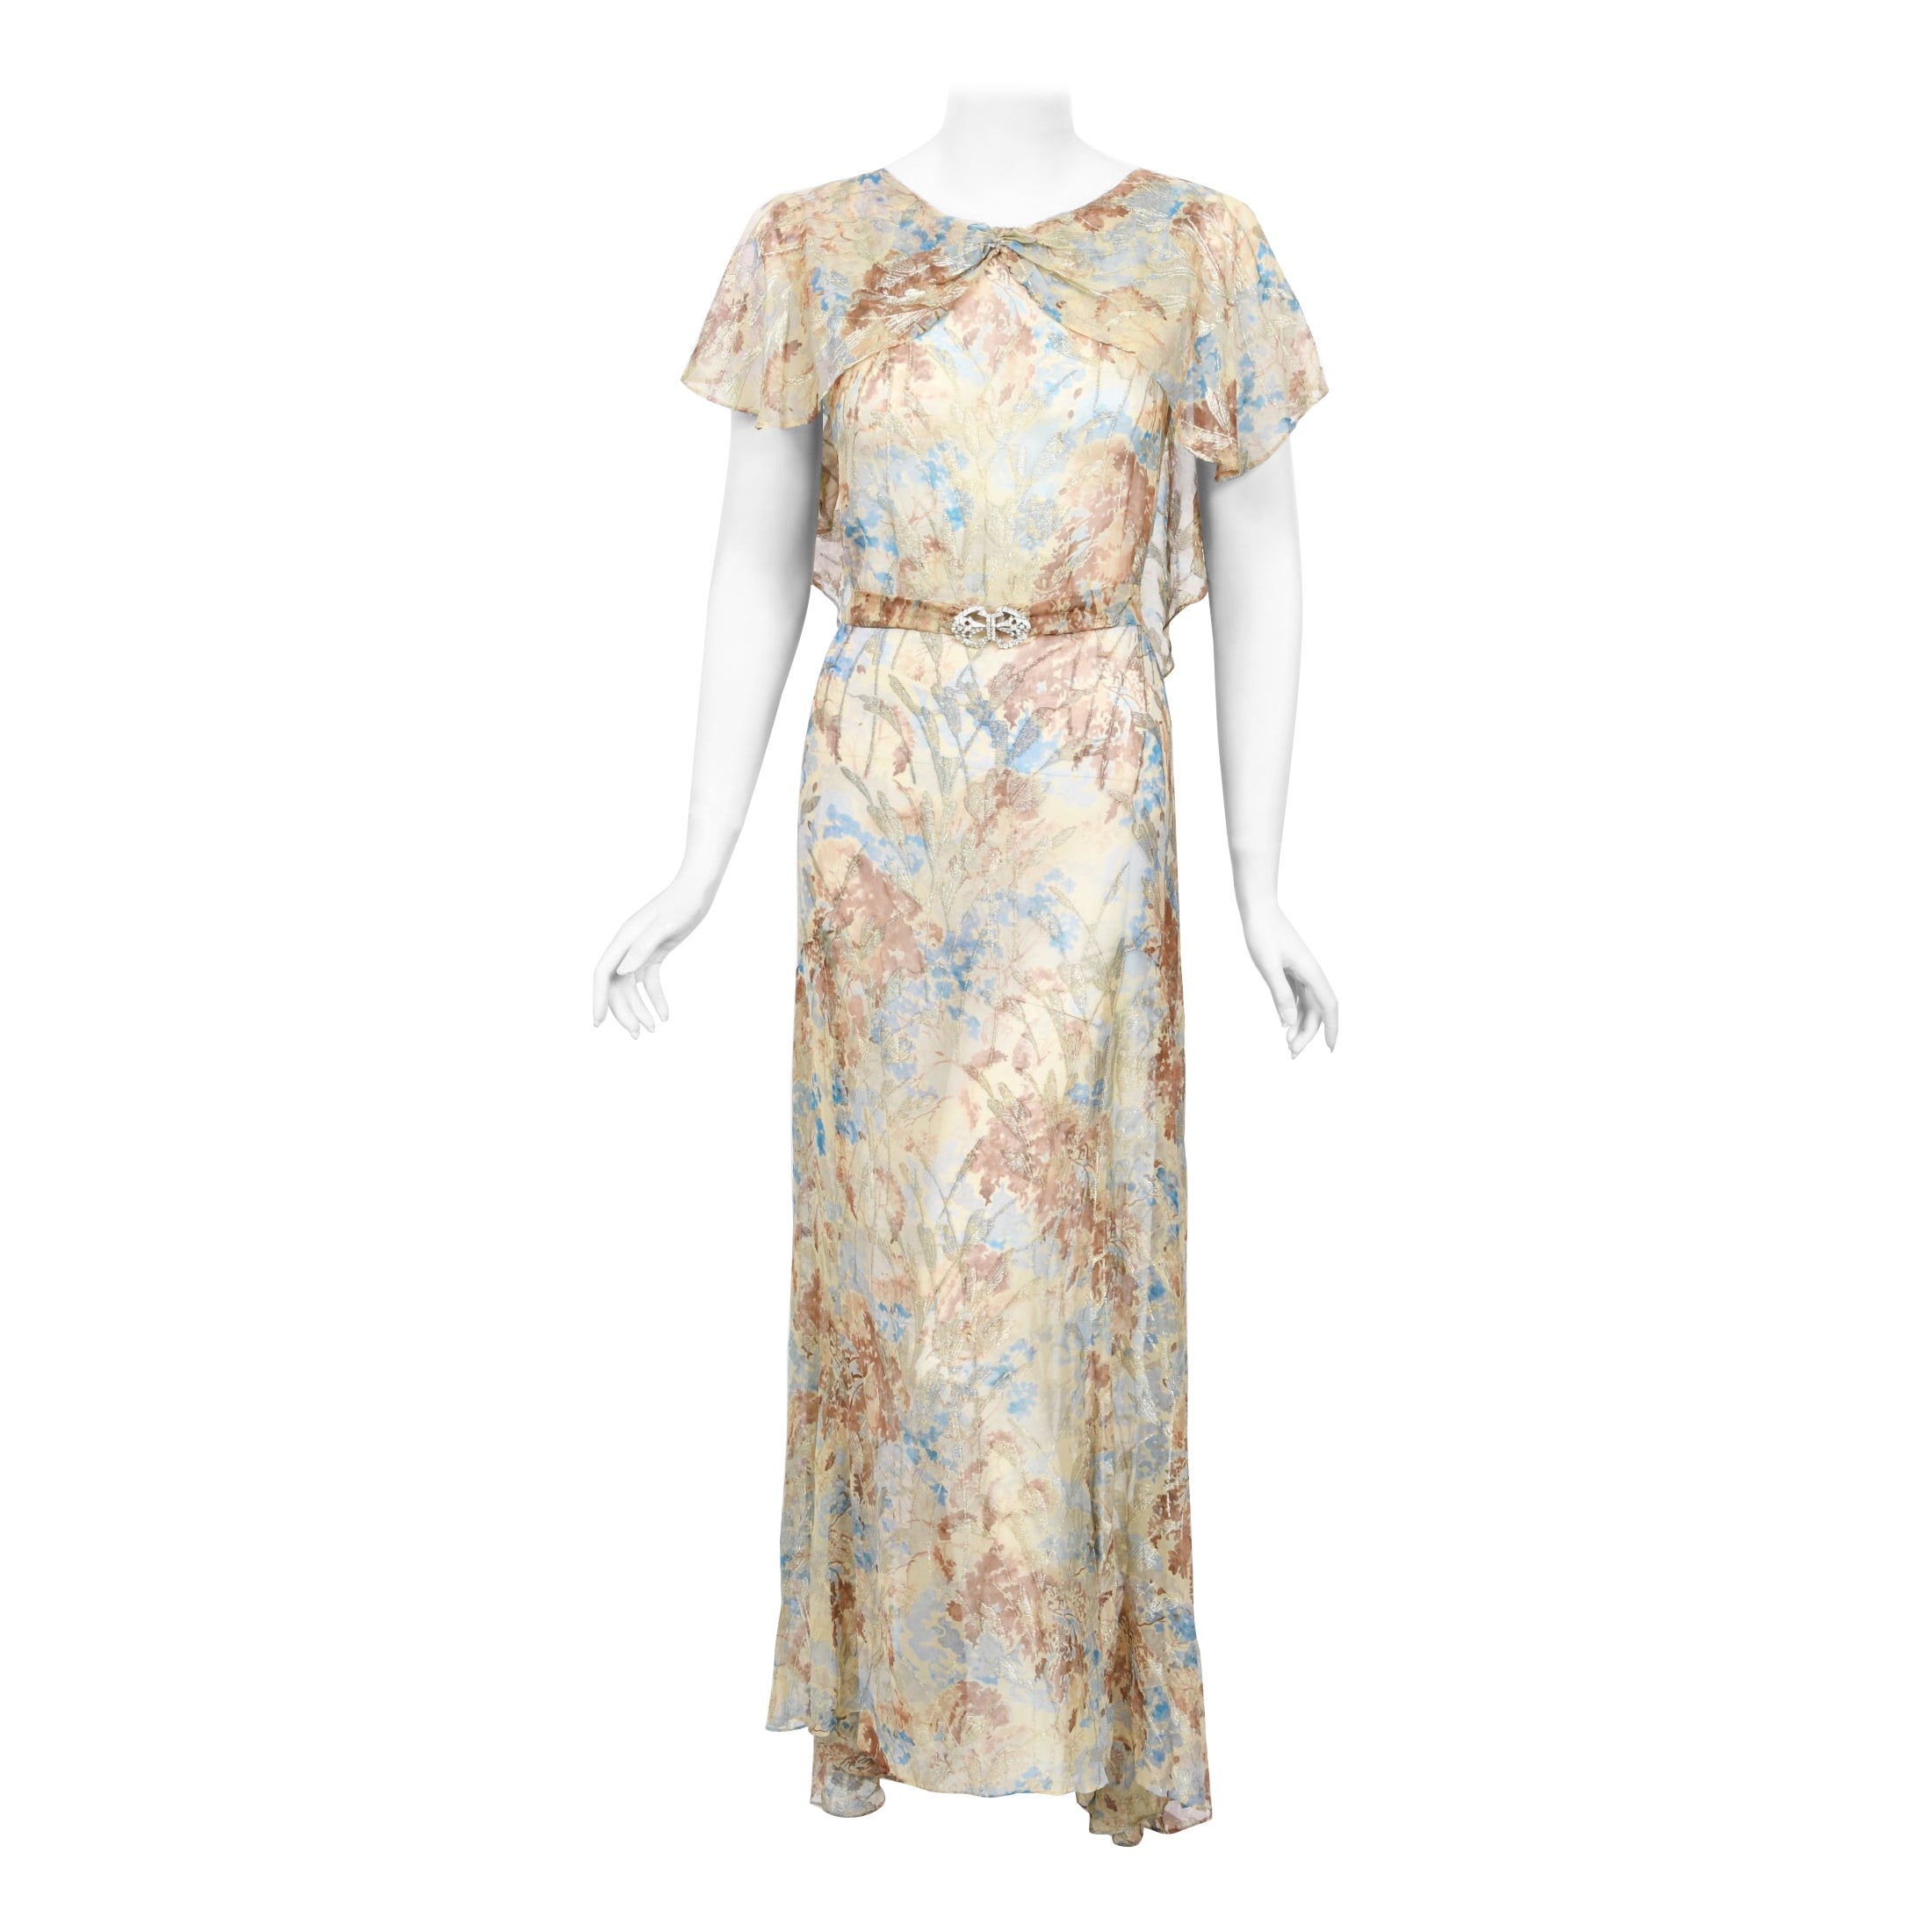 Vintage 1930's Metallic Floral Semi-Sheer Lamé Silk Capelet Drape Belted Gown For Sale